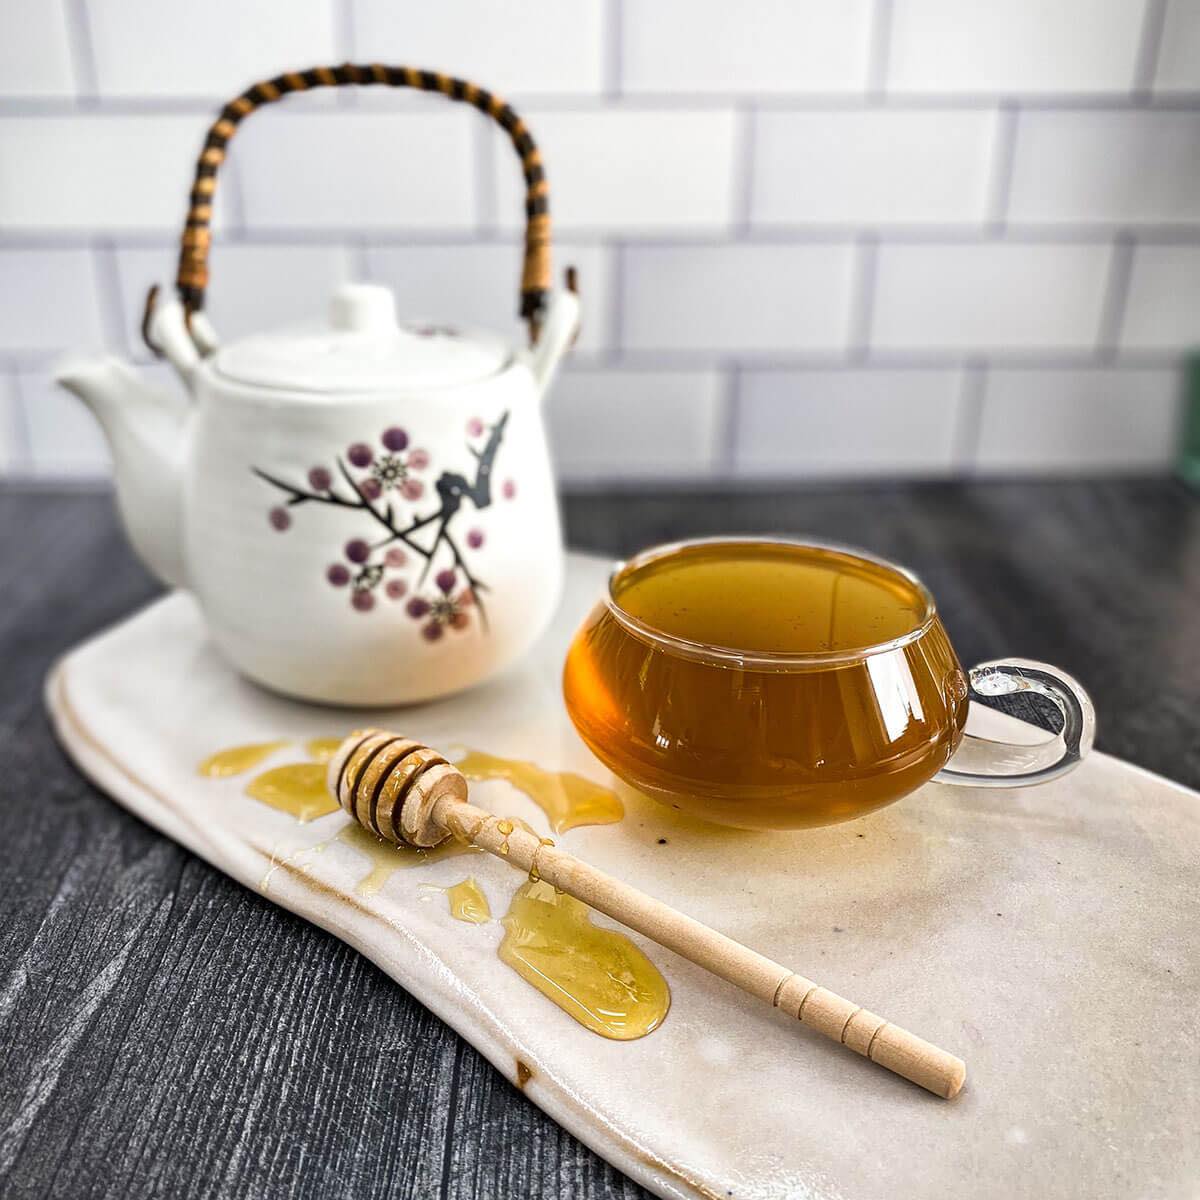 A clear glass tea cup filled with brewed Cough Tea rests on a white ceramic surface with a honey wand and tea pot.